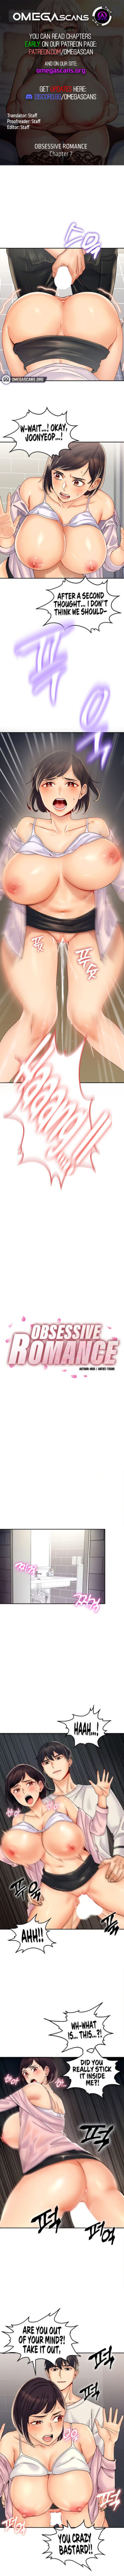 [Hosi, Tosho] Obsessive Romance (1-12) [English] [Omega Scans] [Ongoing]